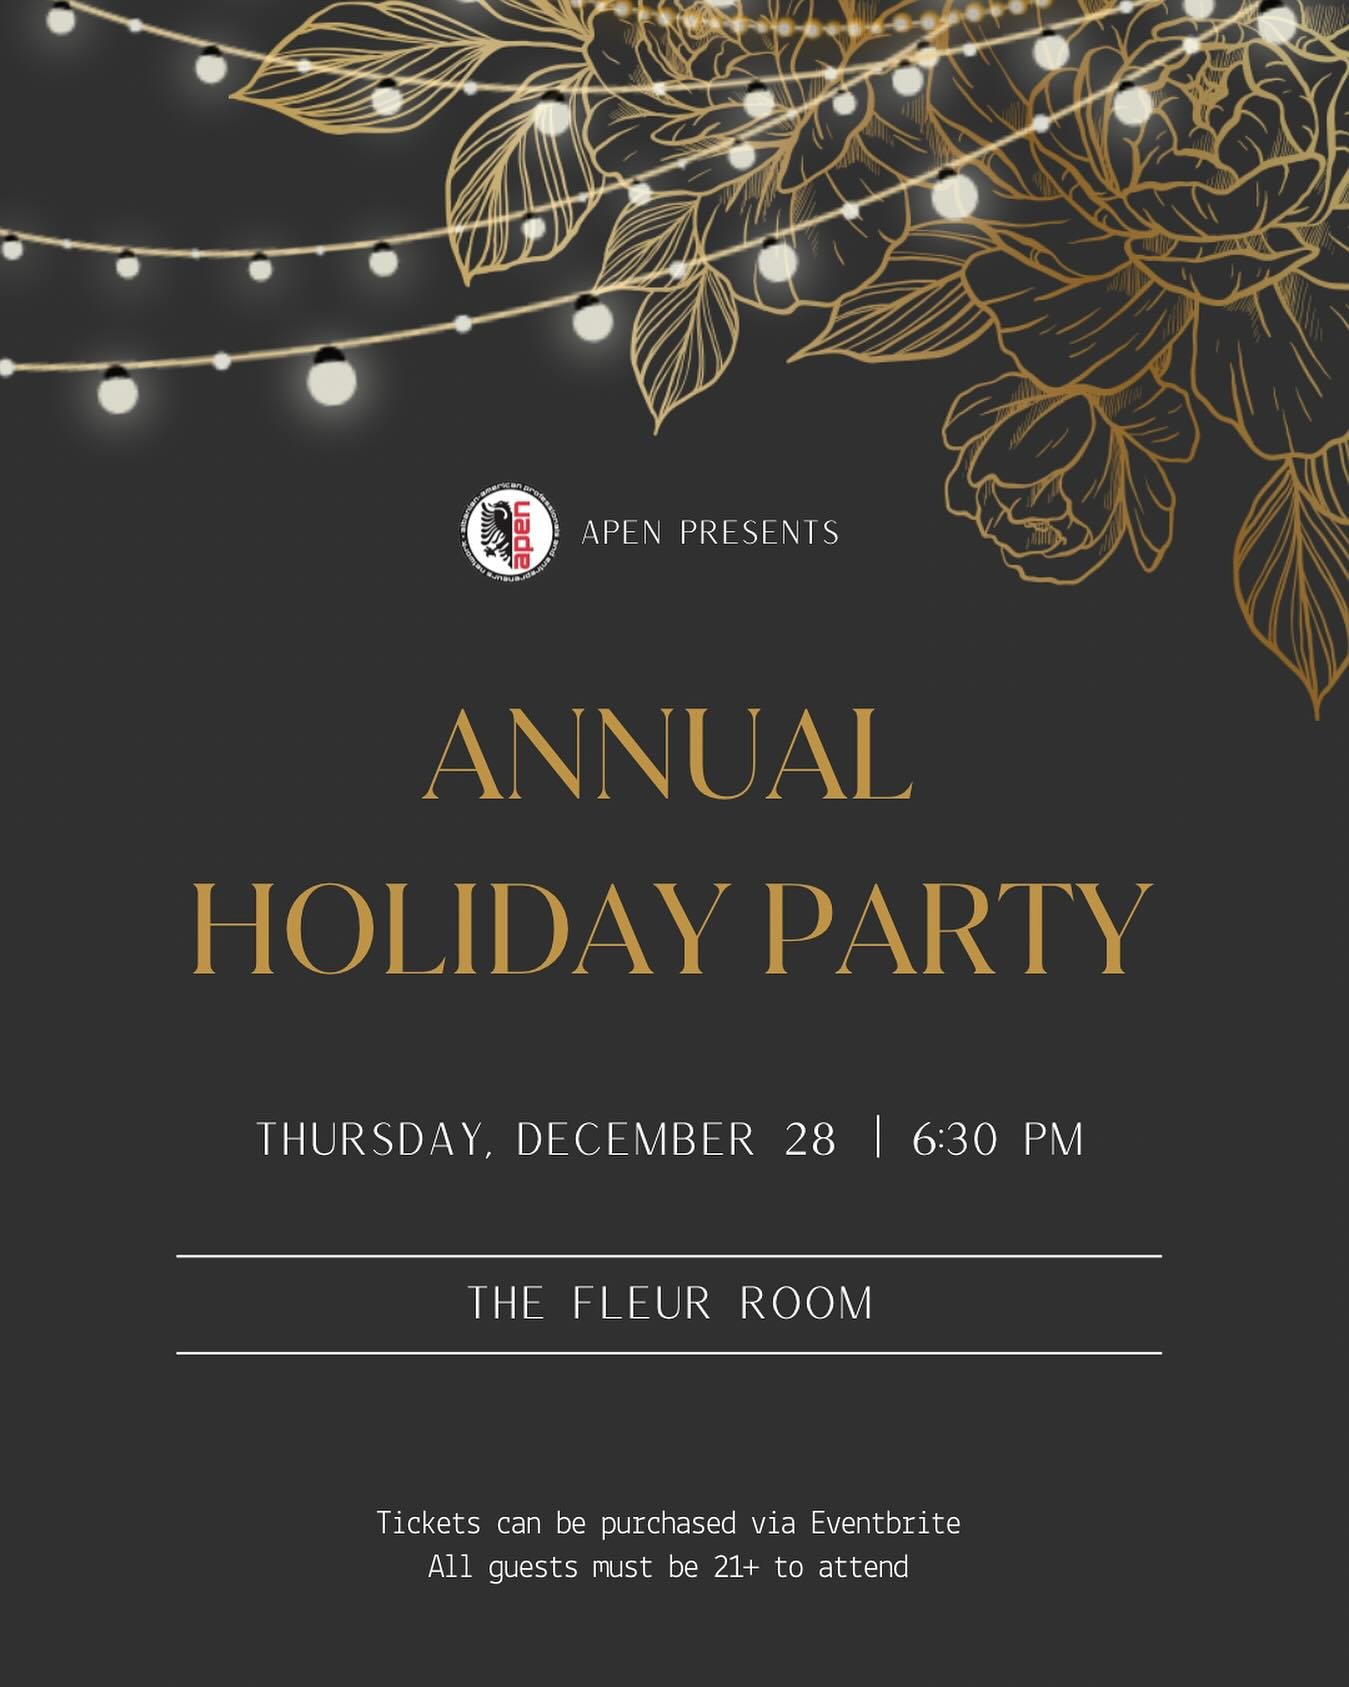 We hope you saved the date for our Annual Holiday Party! Join us on December 28 for an evening of celebration, continued friendships and new beginnings! 

Tickets can be purchased through the link in our bio.

21+ event

📍 @fleurroomny 
📸 @letabpho